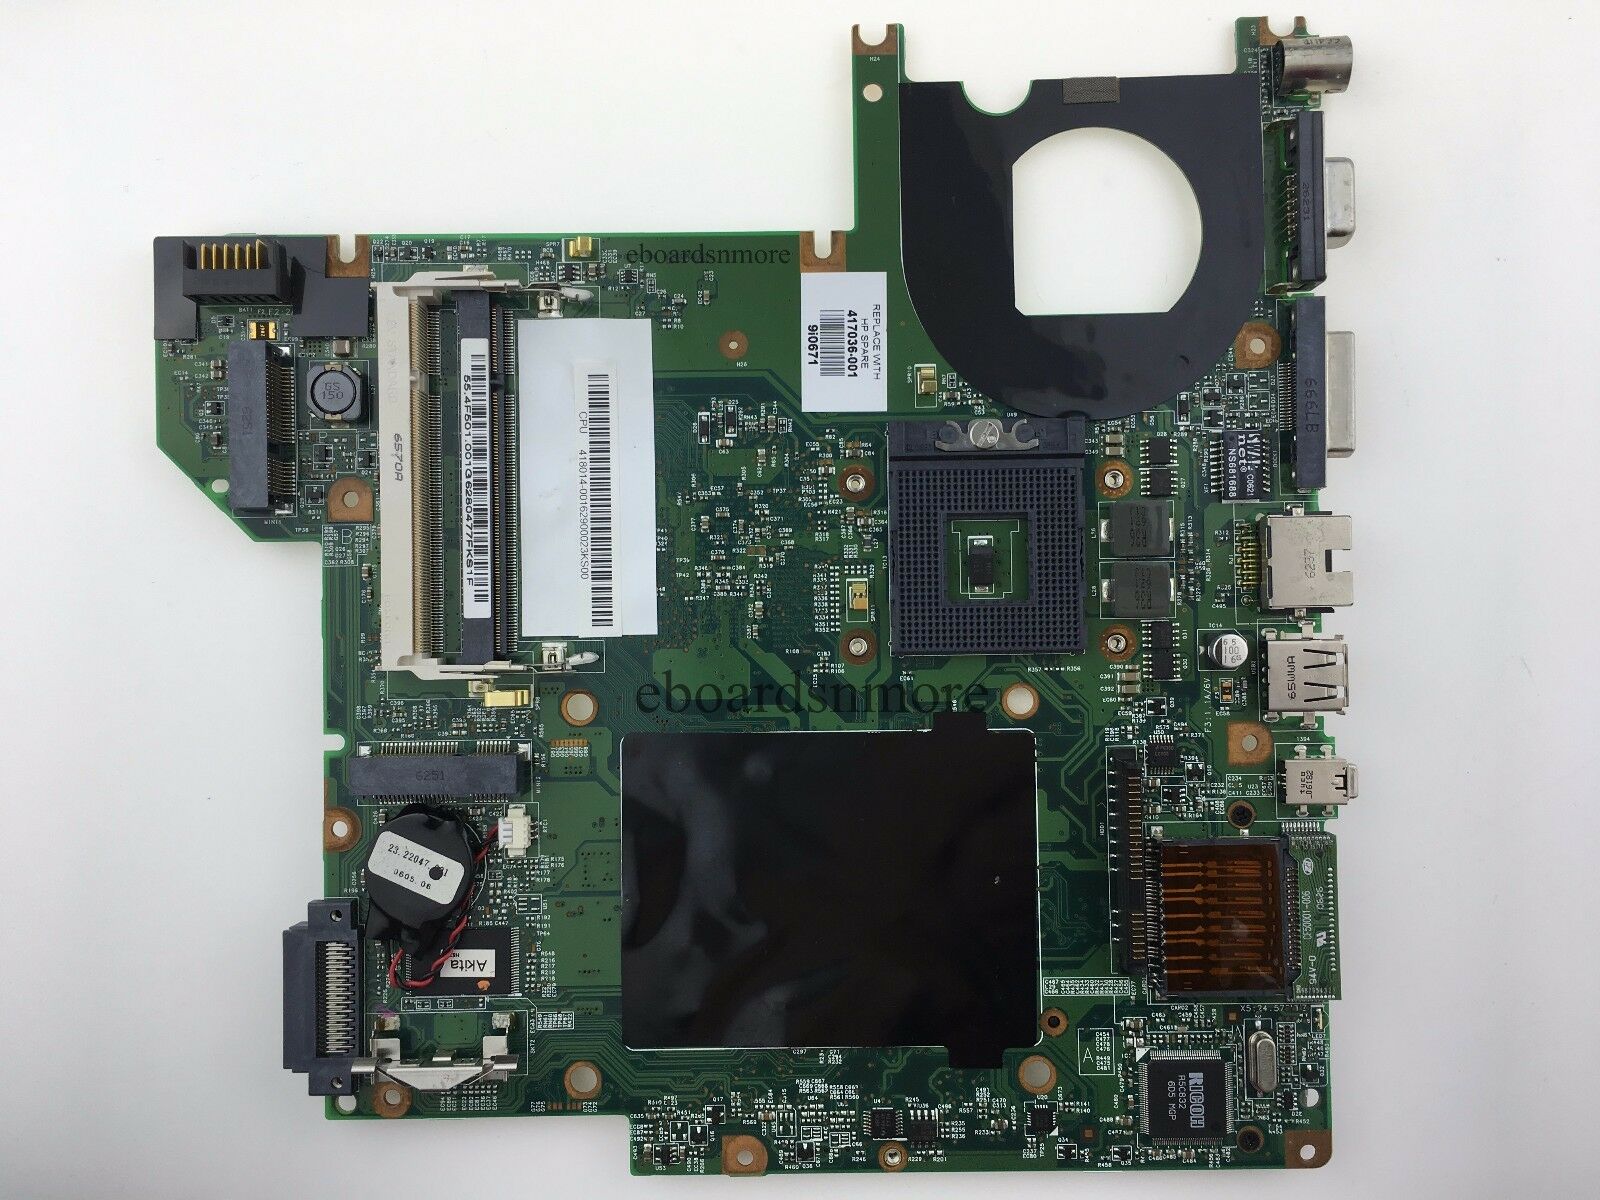 417036-001 Motherboard for HP DV2000 Laptop, Intel HD,48.4F501.011 05232-1 Socket Type: SEE PICS OR DESCRIPT - Click Image to Close